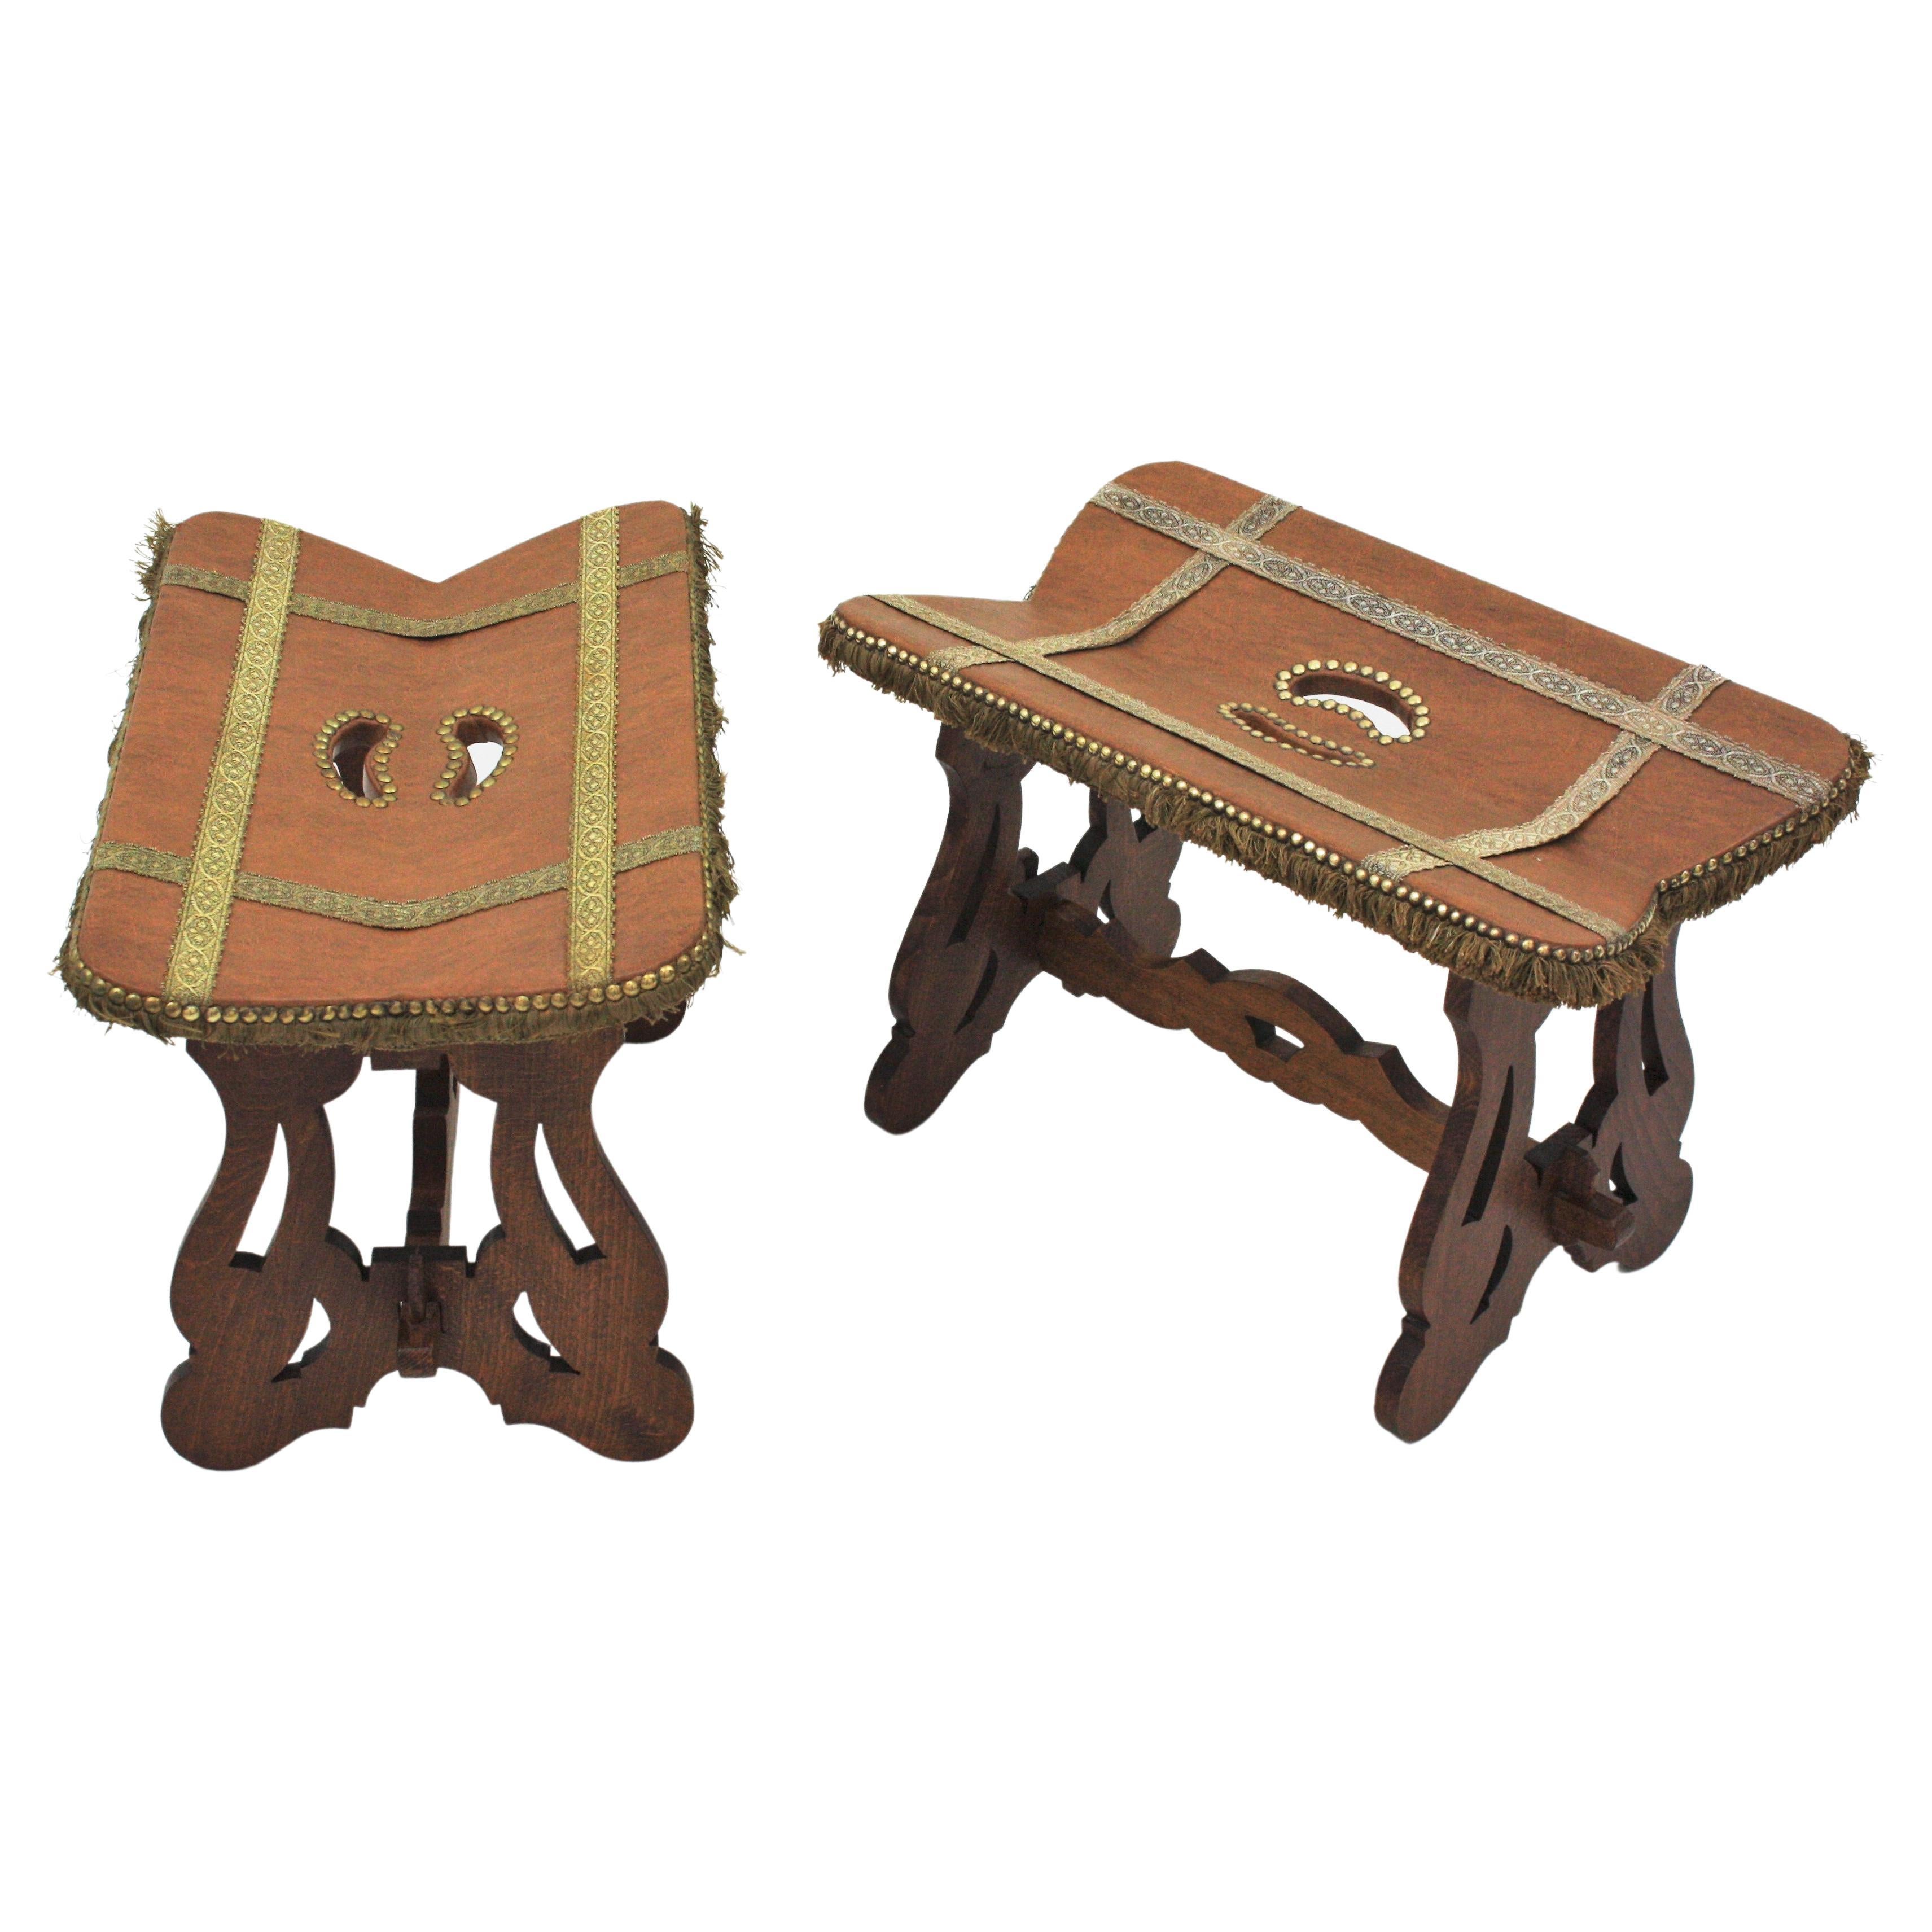 Beautiful pair of wooden Spanish colonial stools with trimming details. Spain, 1950s.
These stools are supported on trestle bases with lyre legs. The tops wear the original upholstery in brown leatherette with trimming details and fringed sides